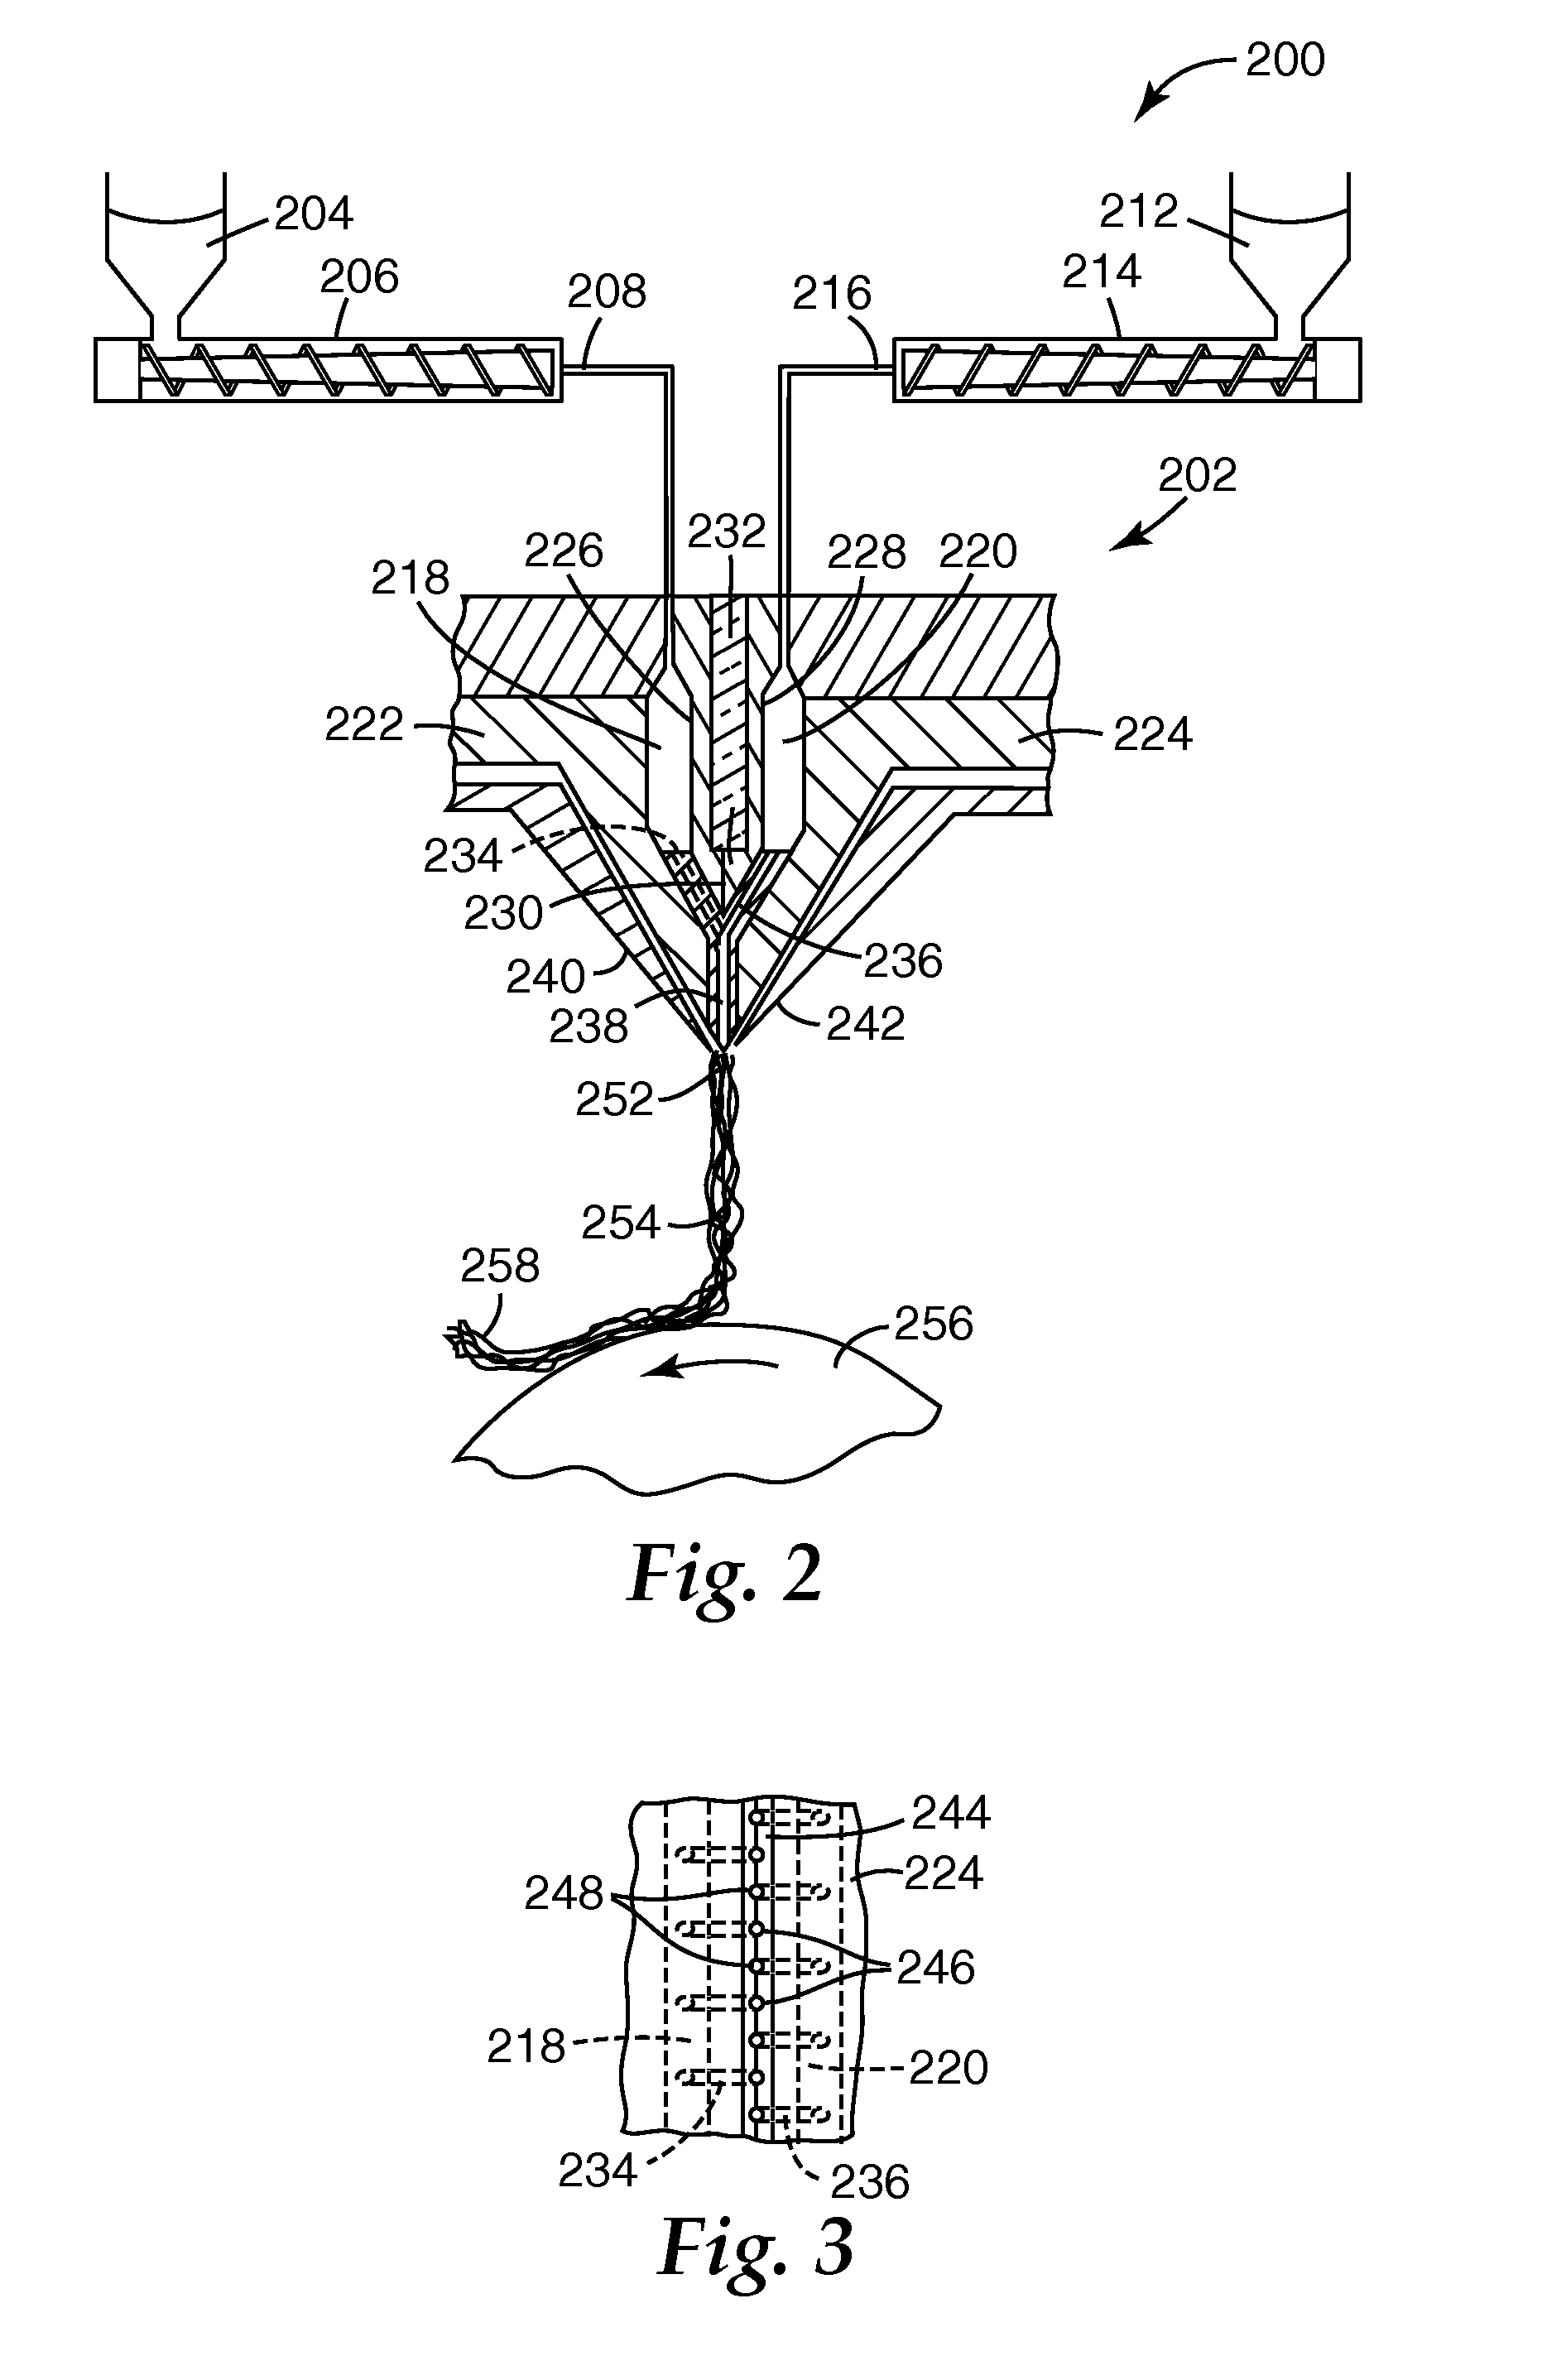 Method for making shaped filtration articles